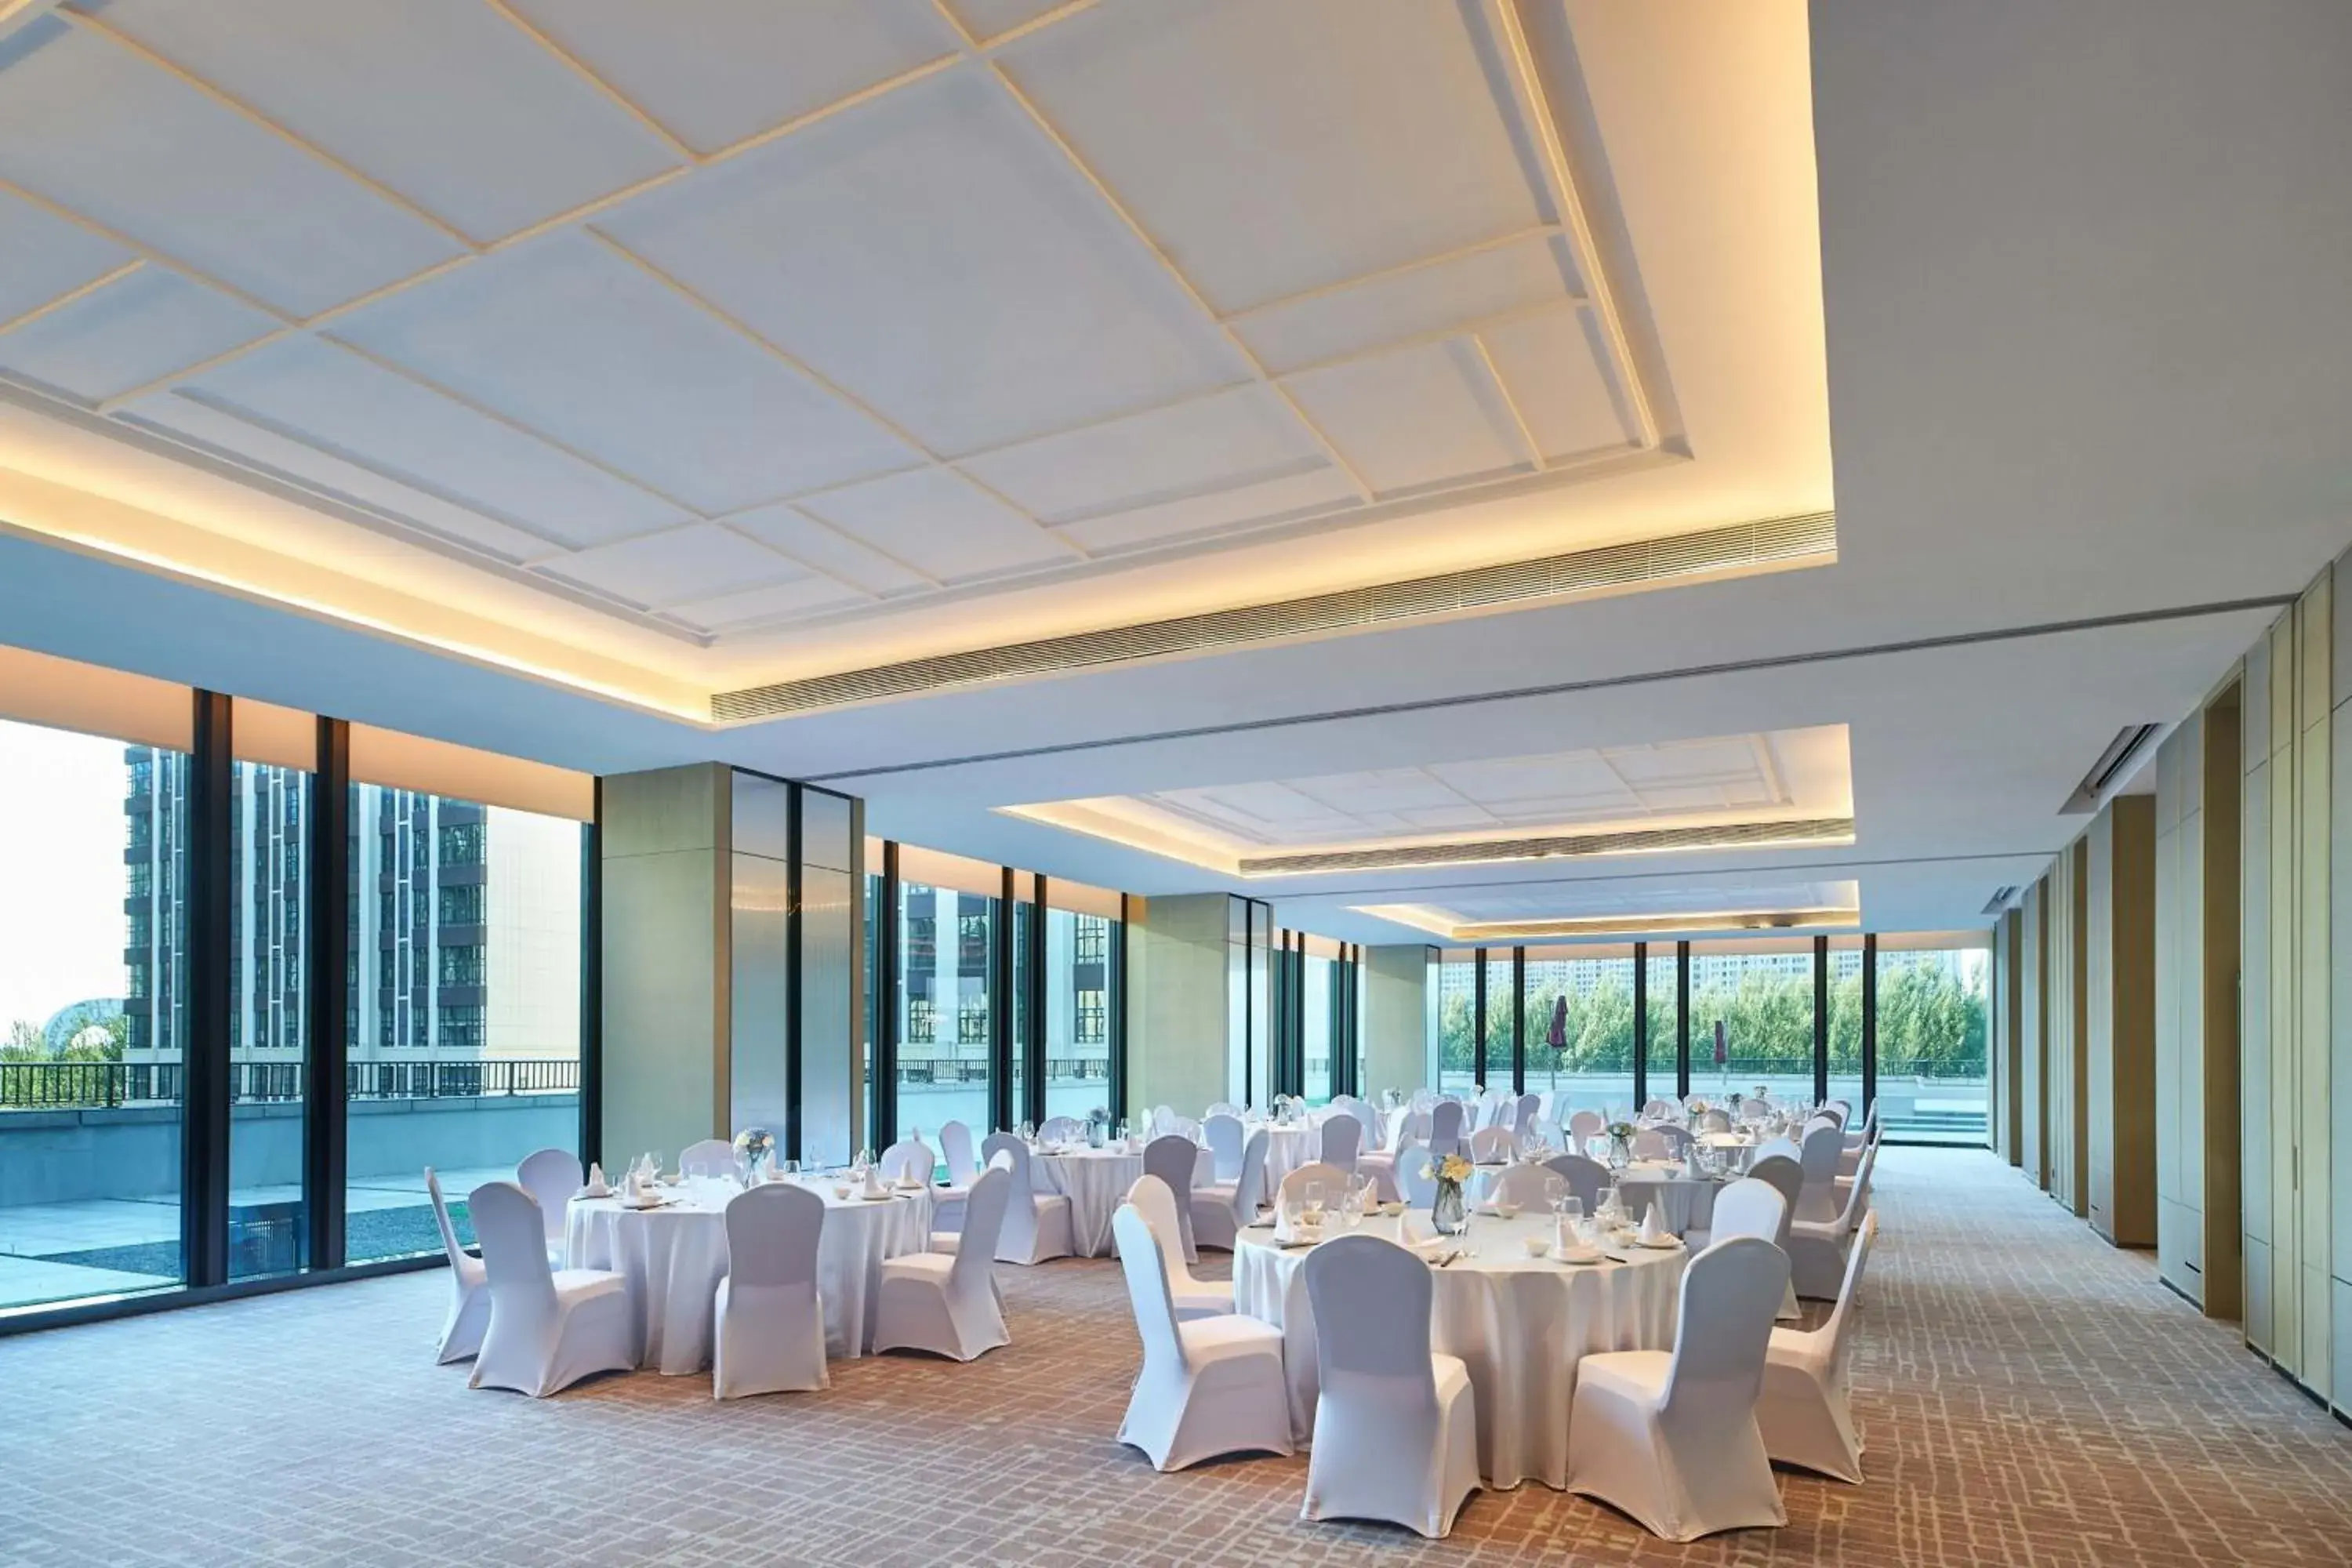 Meeting/conference room, Banquet Facilities in Courtyard by Marriott Changchun